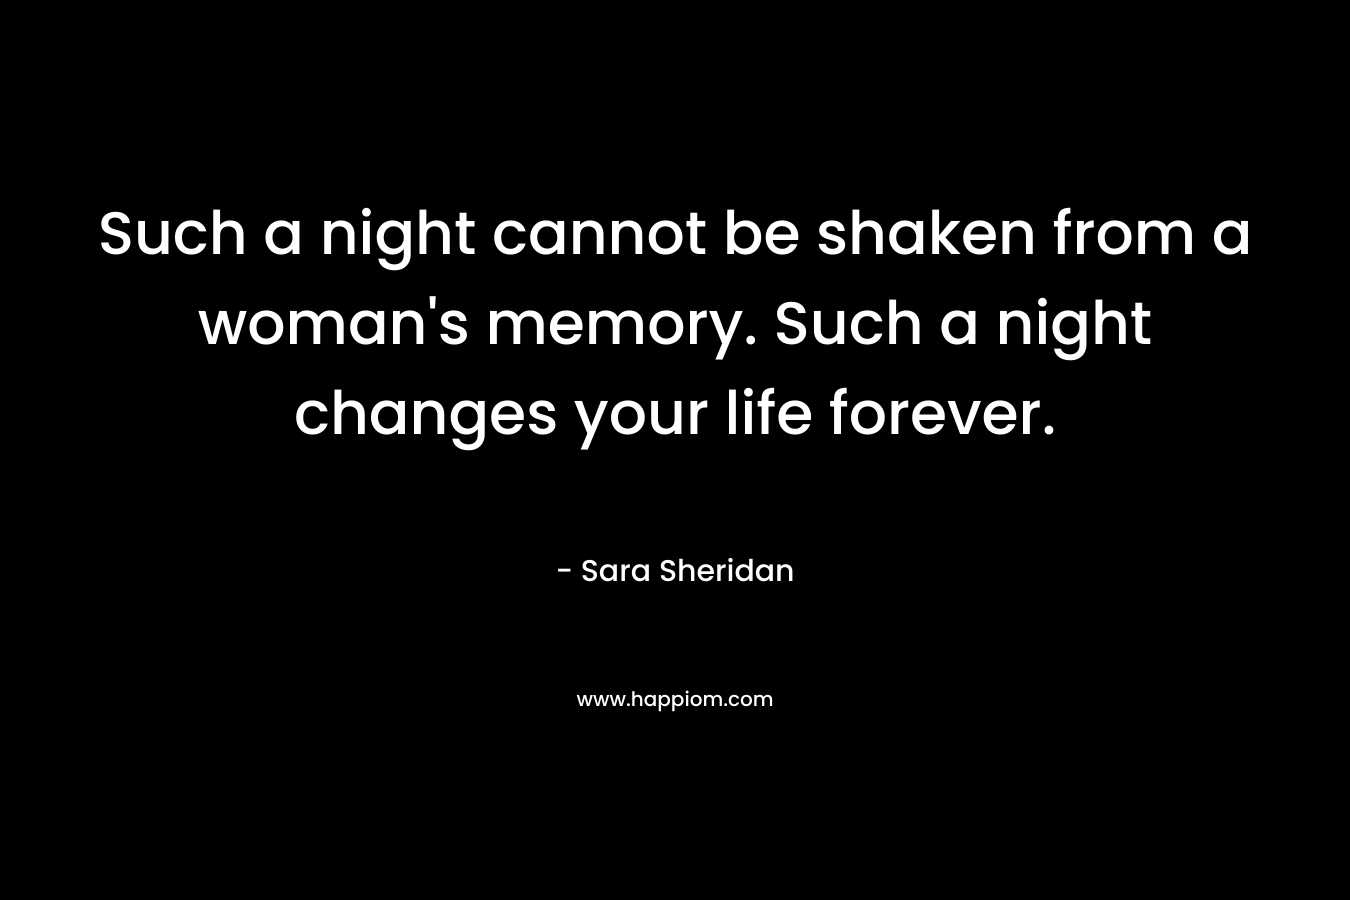 Such a night cannot be shaken from a woman’s memory. Such a night changes your life forever. – Sara Sheridan